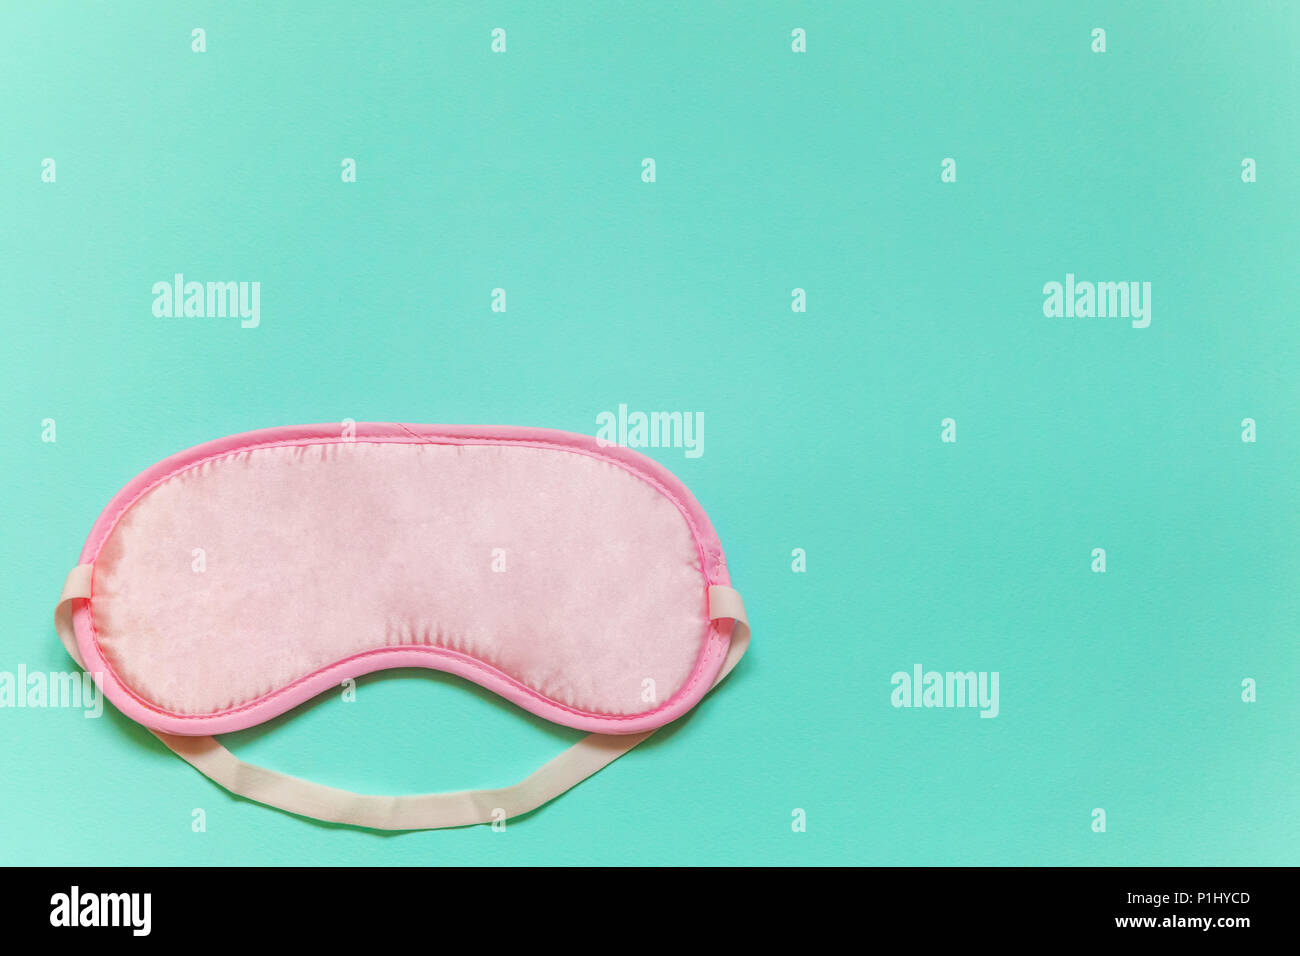 Sleeping eye mask, isolated on blue pastel colourful trendy background. Do not disturb me, let me sleep. Rest, good night, insomnia, relaxation, tired Stock Photo